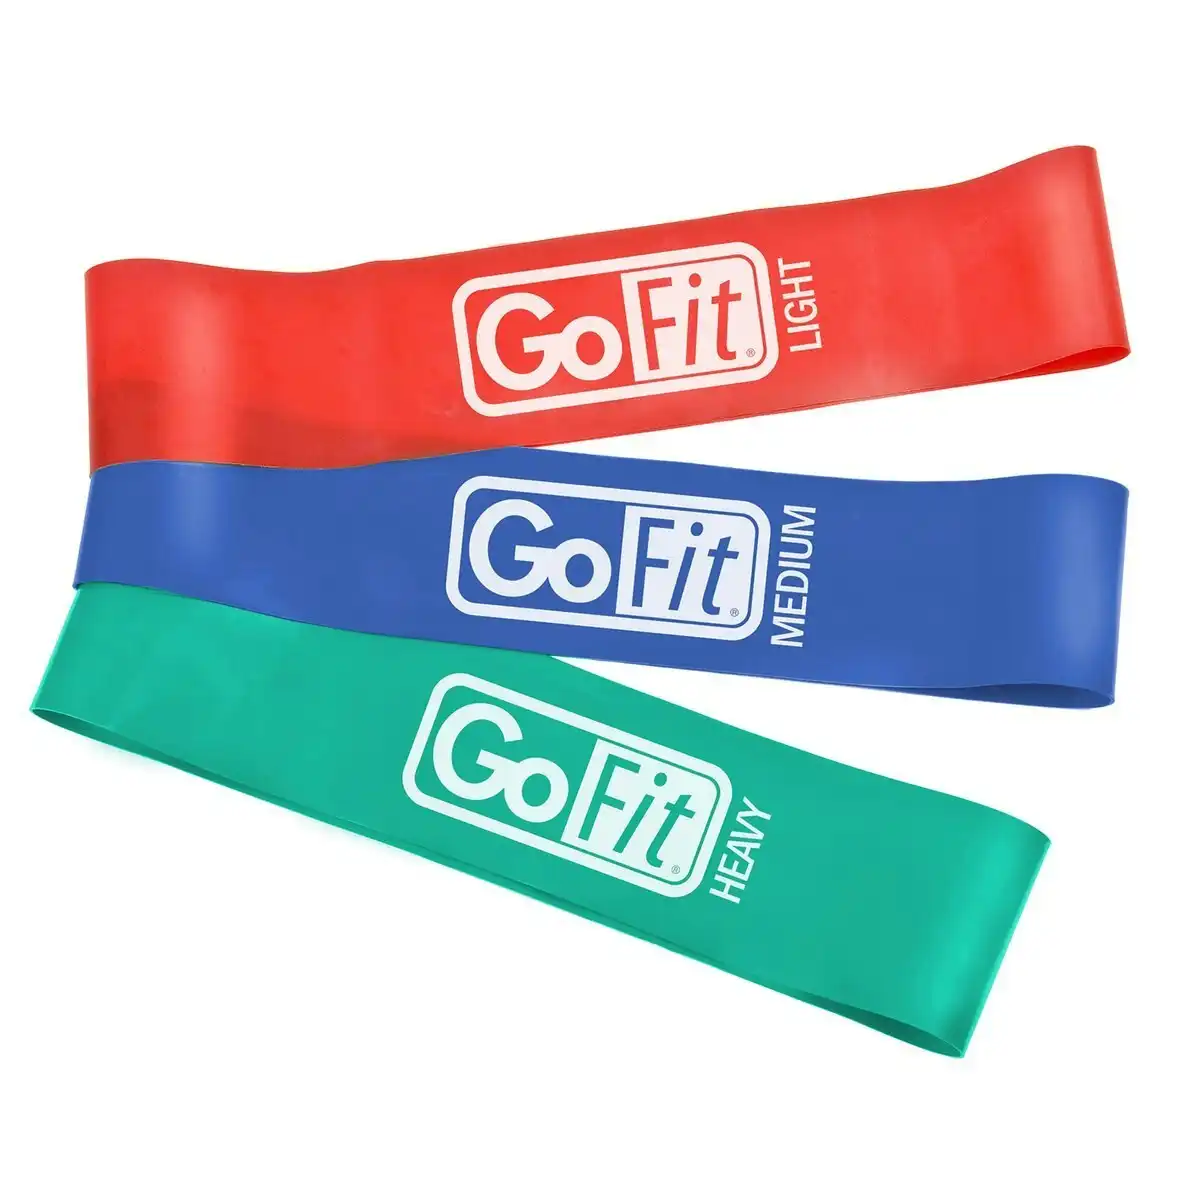 3pc Gofit 24cm Power Loop Fitness Workout/Strength Training Resistance Bands Set